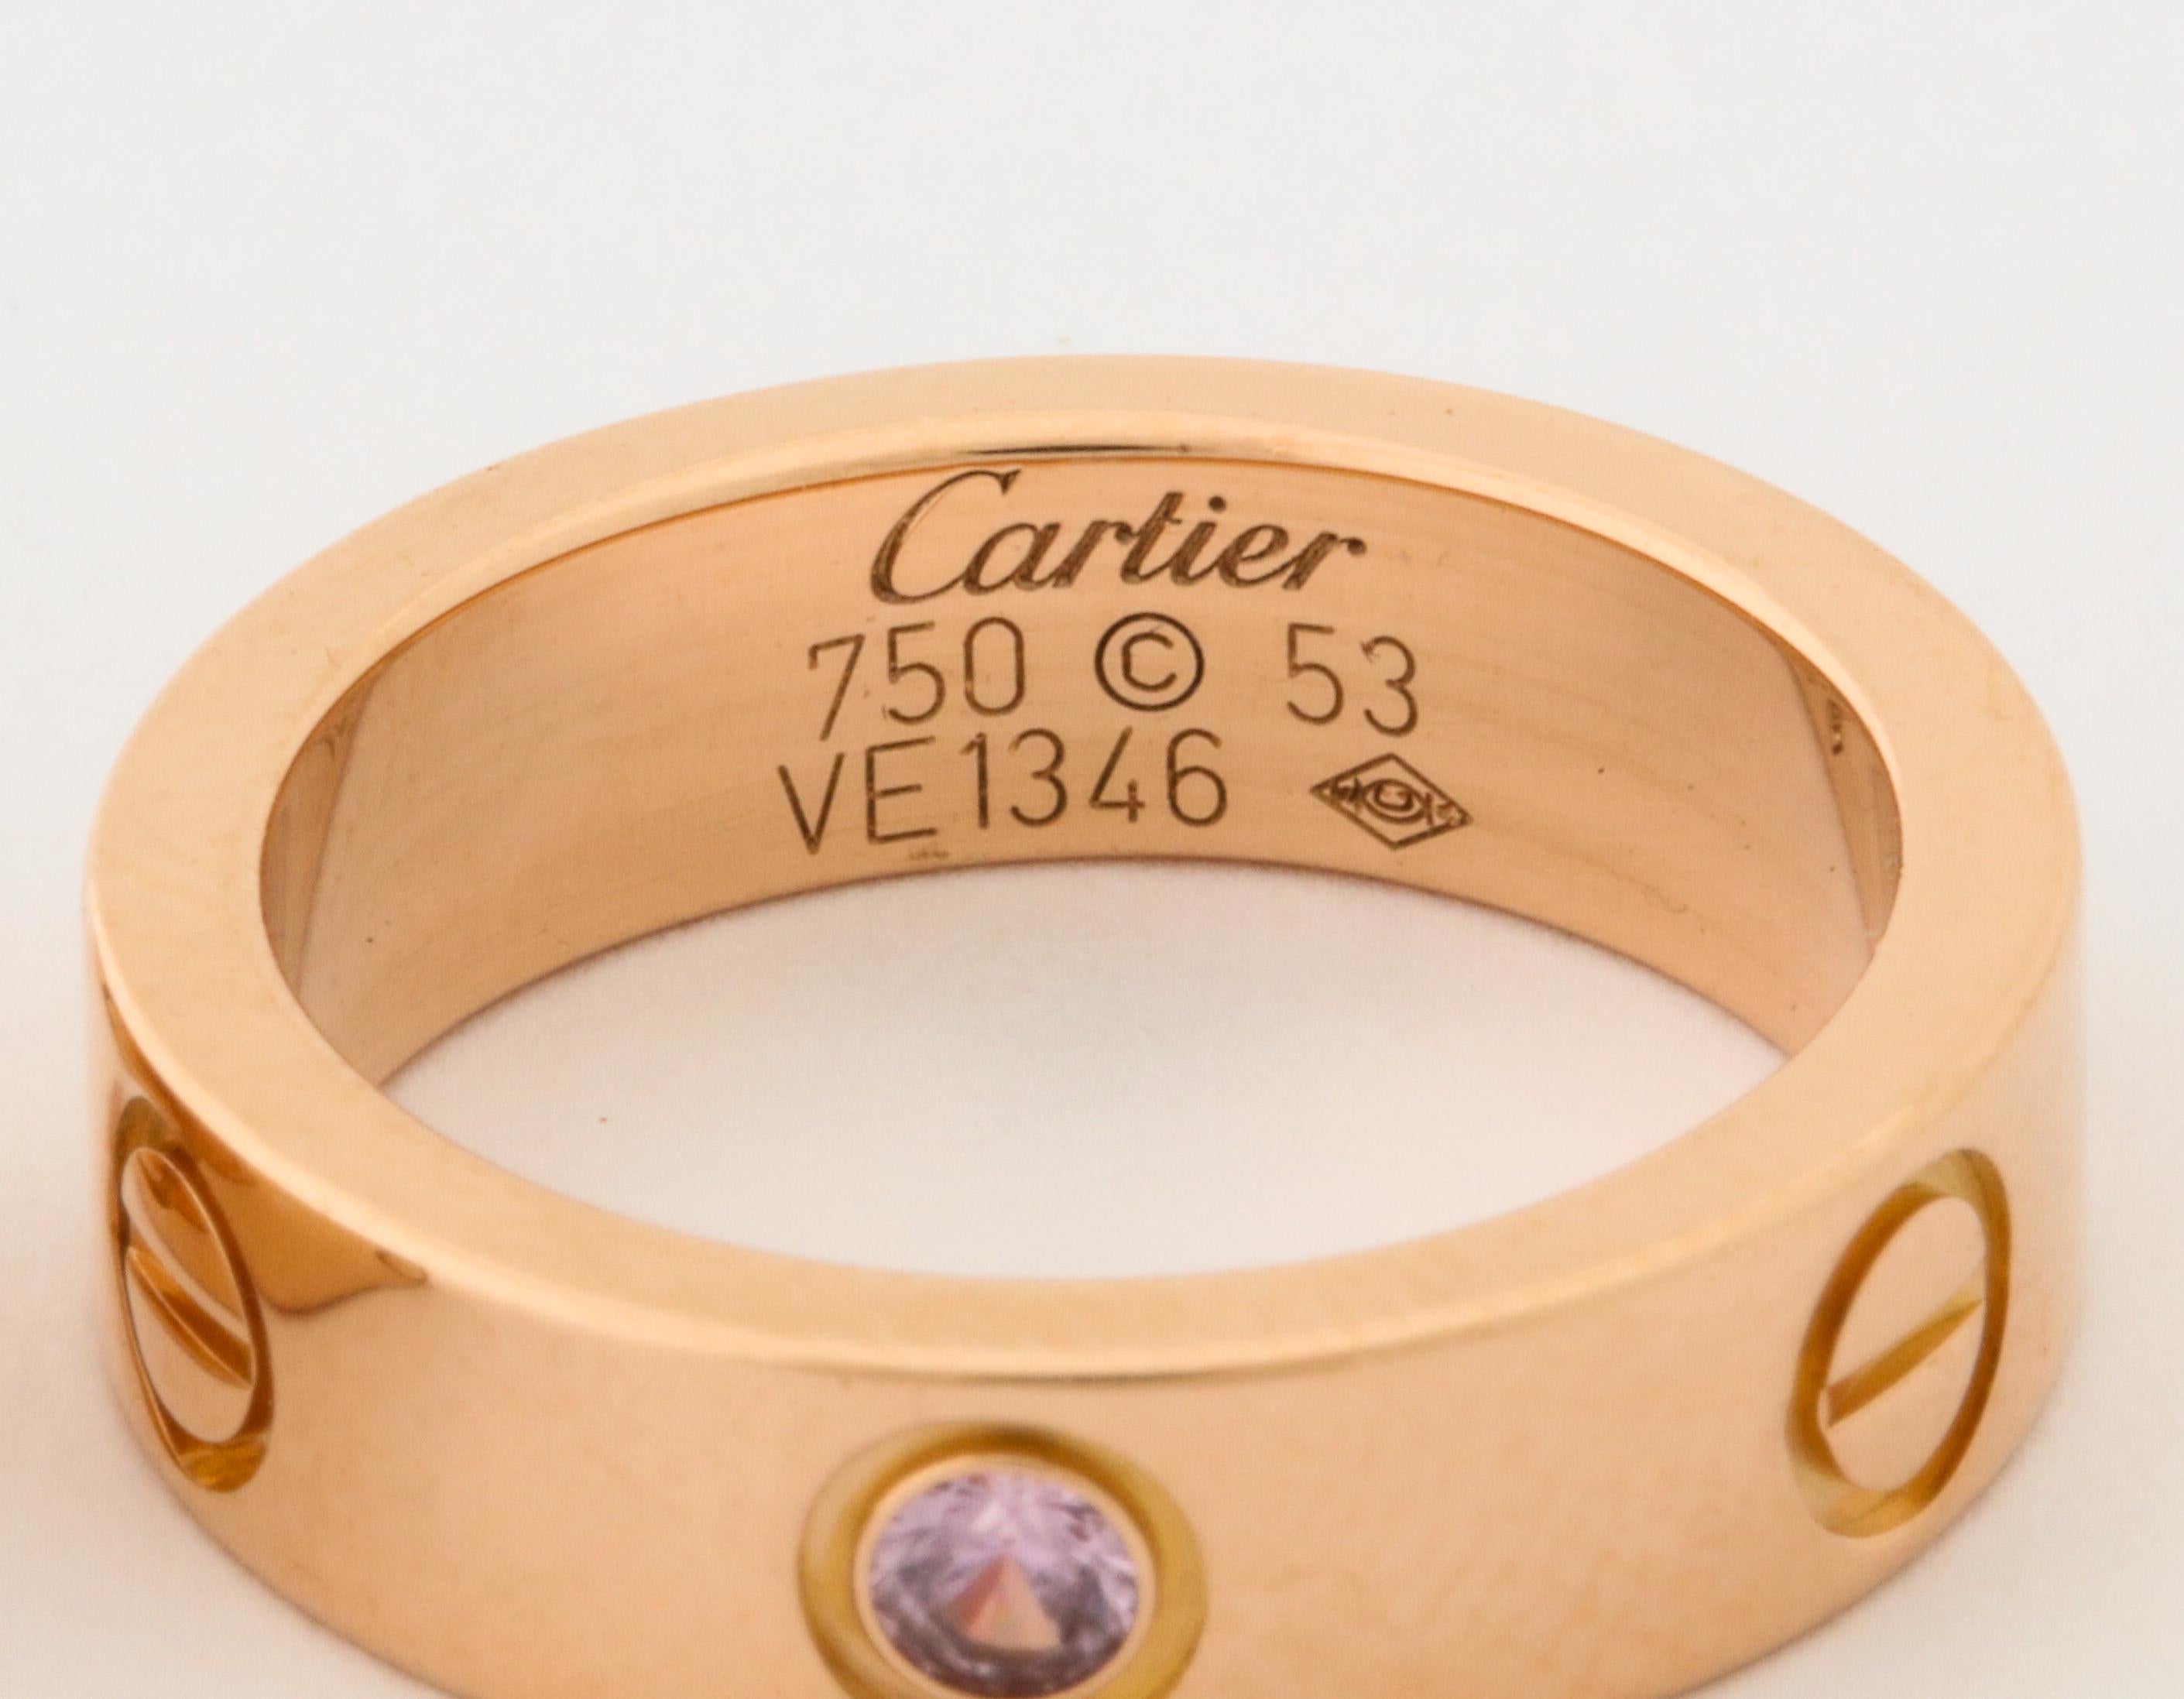 Cartier Love Bands with Pink Sapphires 1